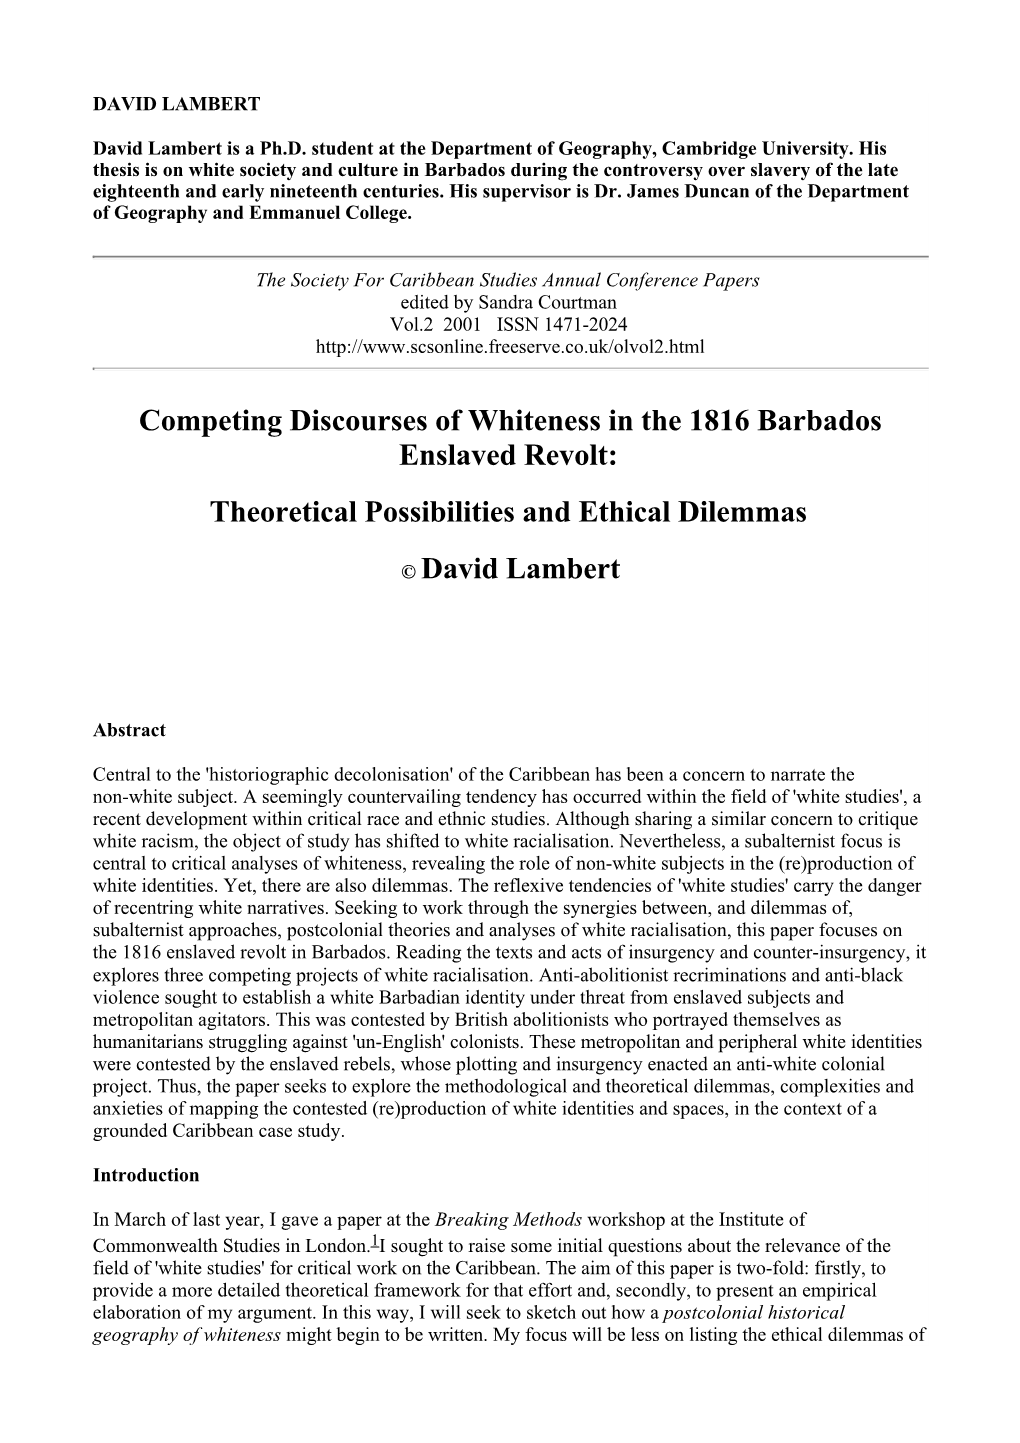 Competing Discourses of Whiteness in the 1816 Barbados Enslaved Revolt